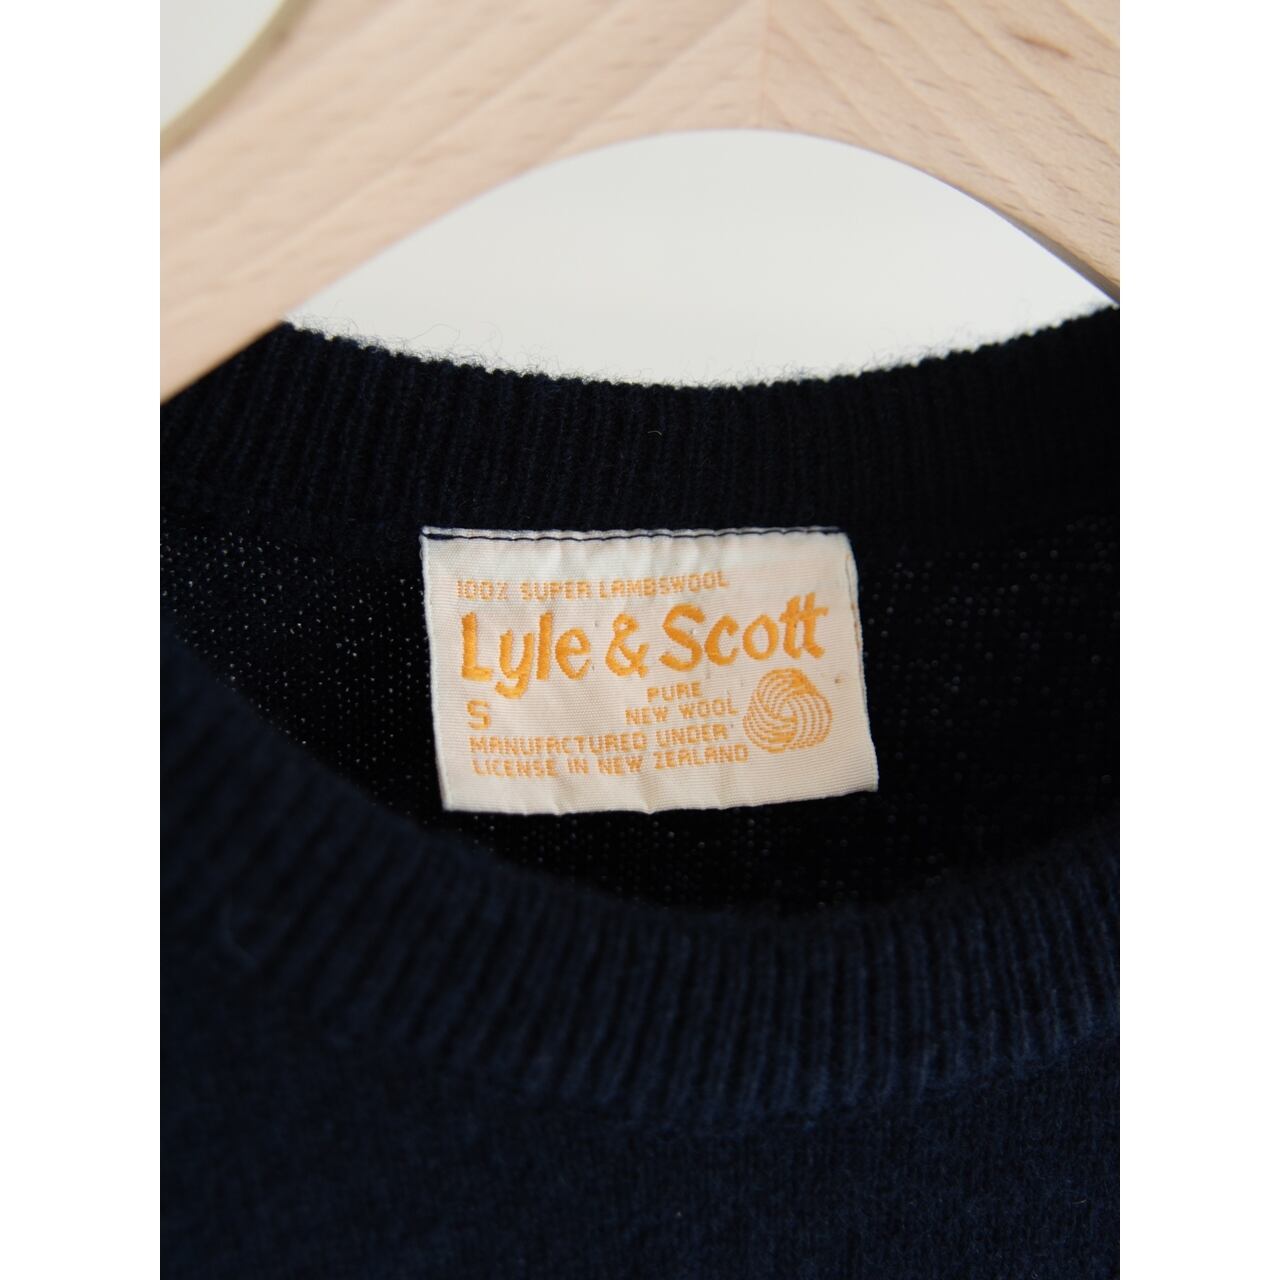 Lyle & Scott】Made in New Zealand 100% Lambswool Sweater（ライル